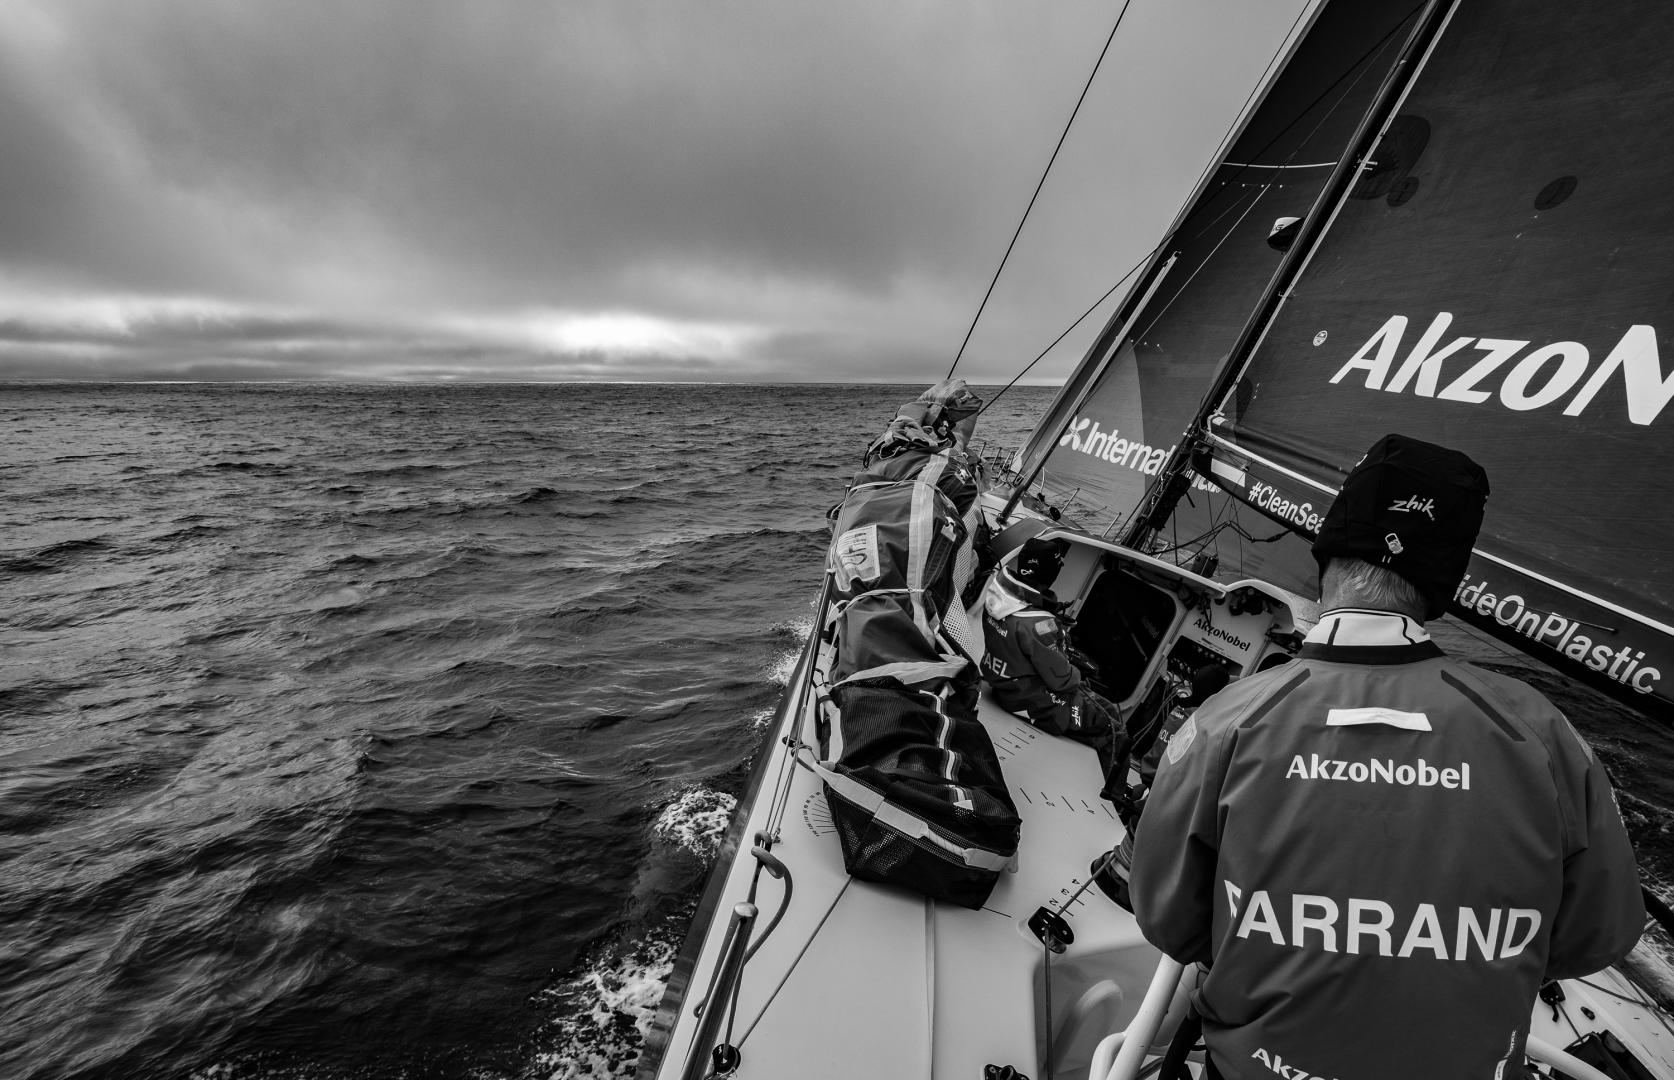 Volvo Ocean Race Leg 02, Lisbon to Cape Town, day 19, on board AkzoNobel. Brad Farrand on the helm heading towards some cold looking clouds.